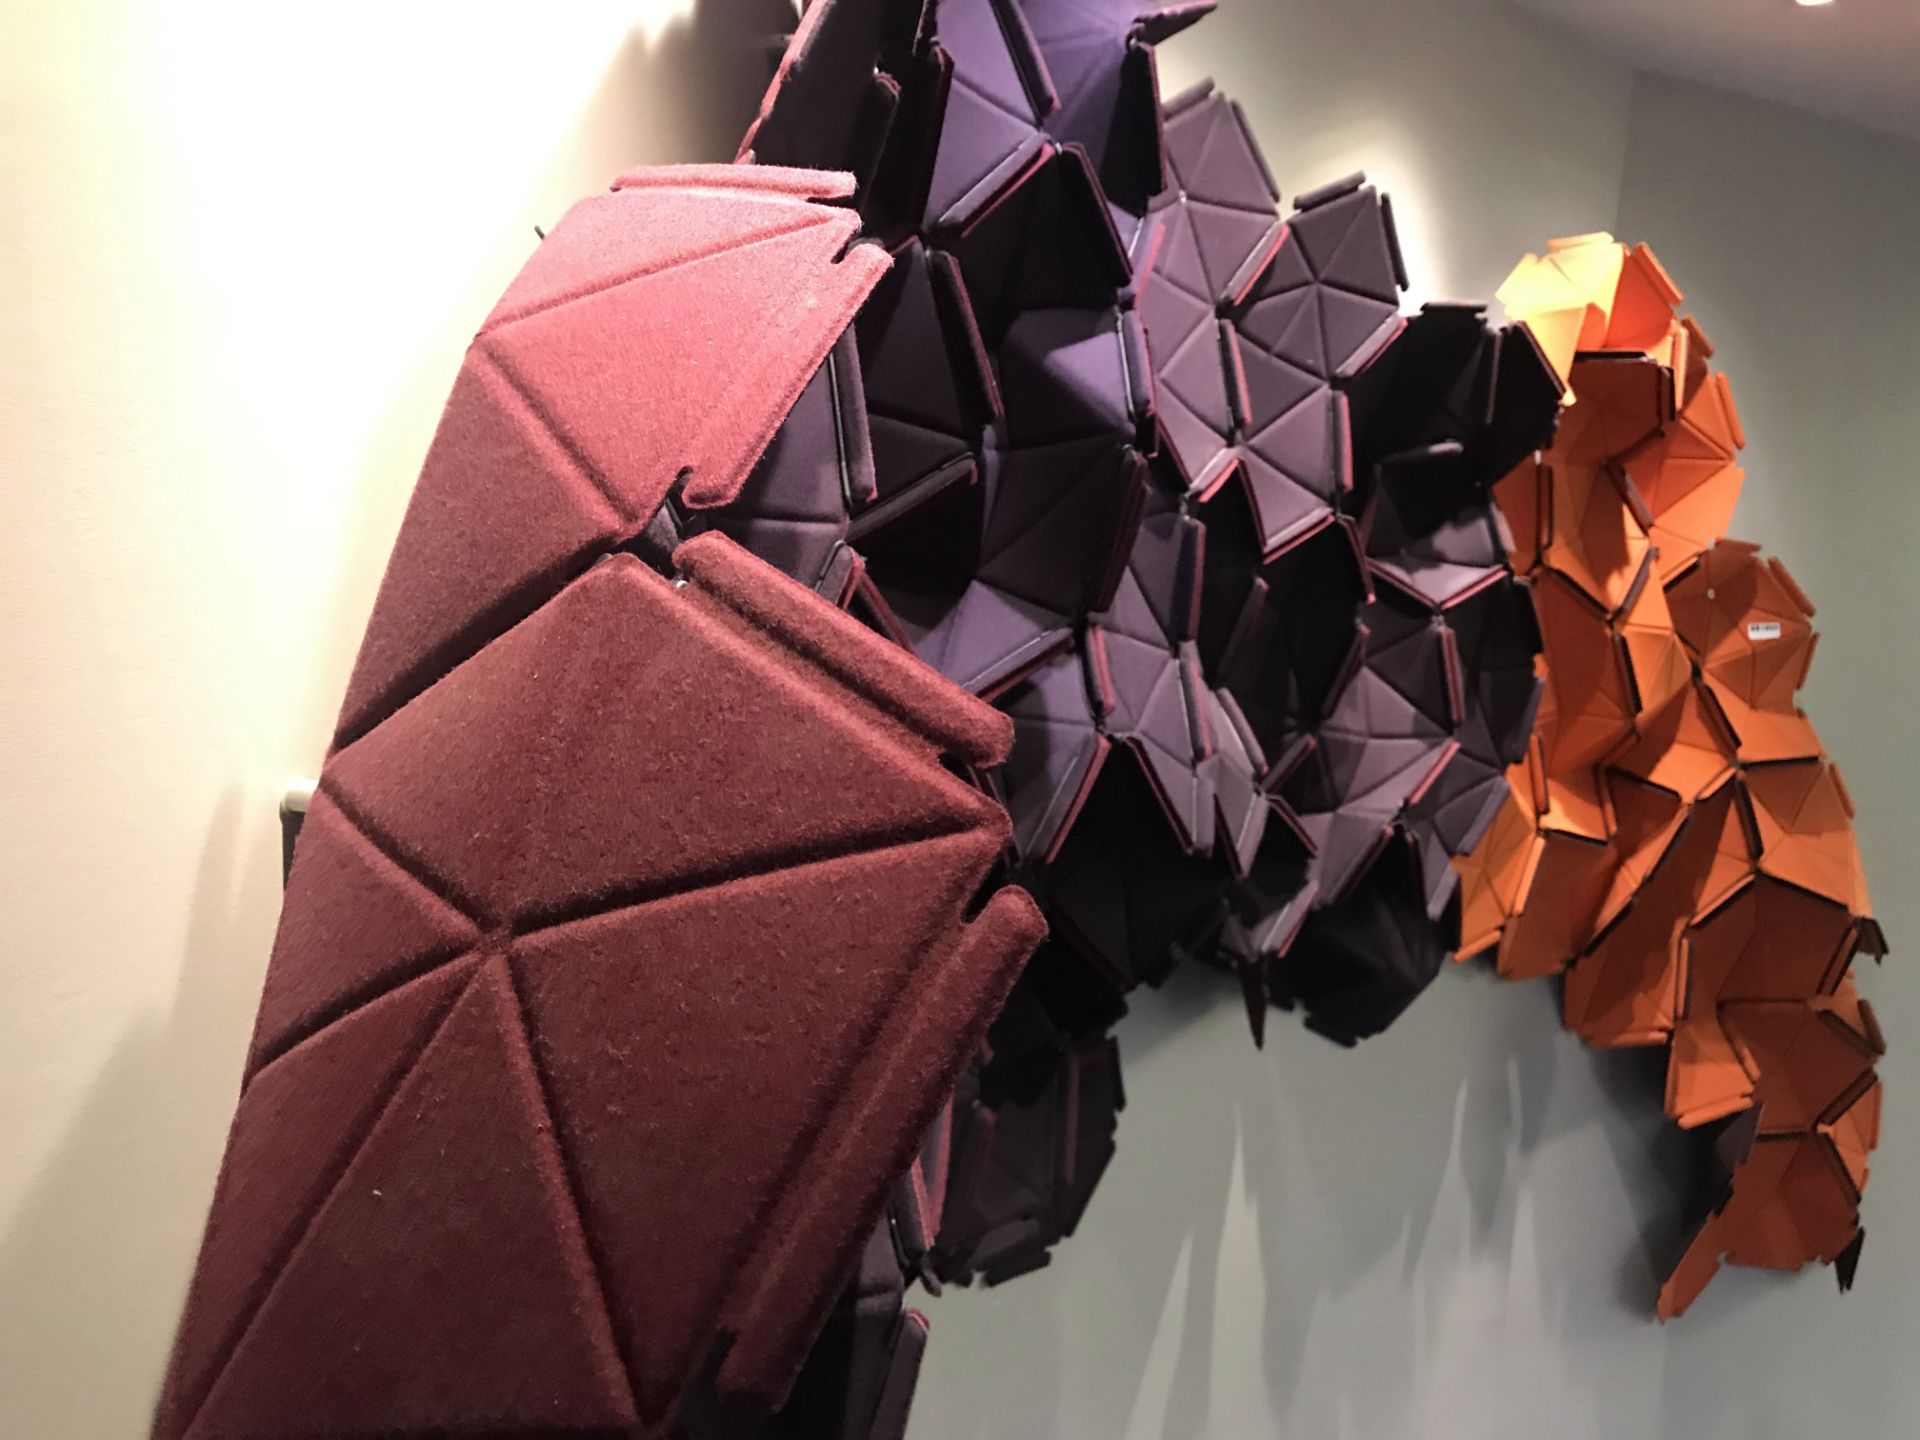 1 x Kvadrat Cloud Three-Dimensional Contemporary Wall Art - 100% Wool - Designed By Ronan and - Image 5 of 7